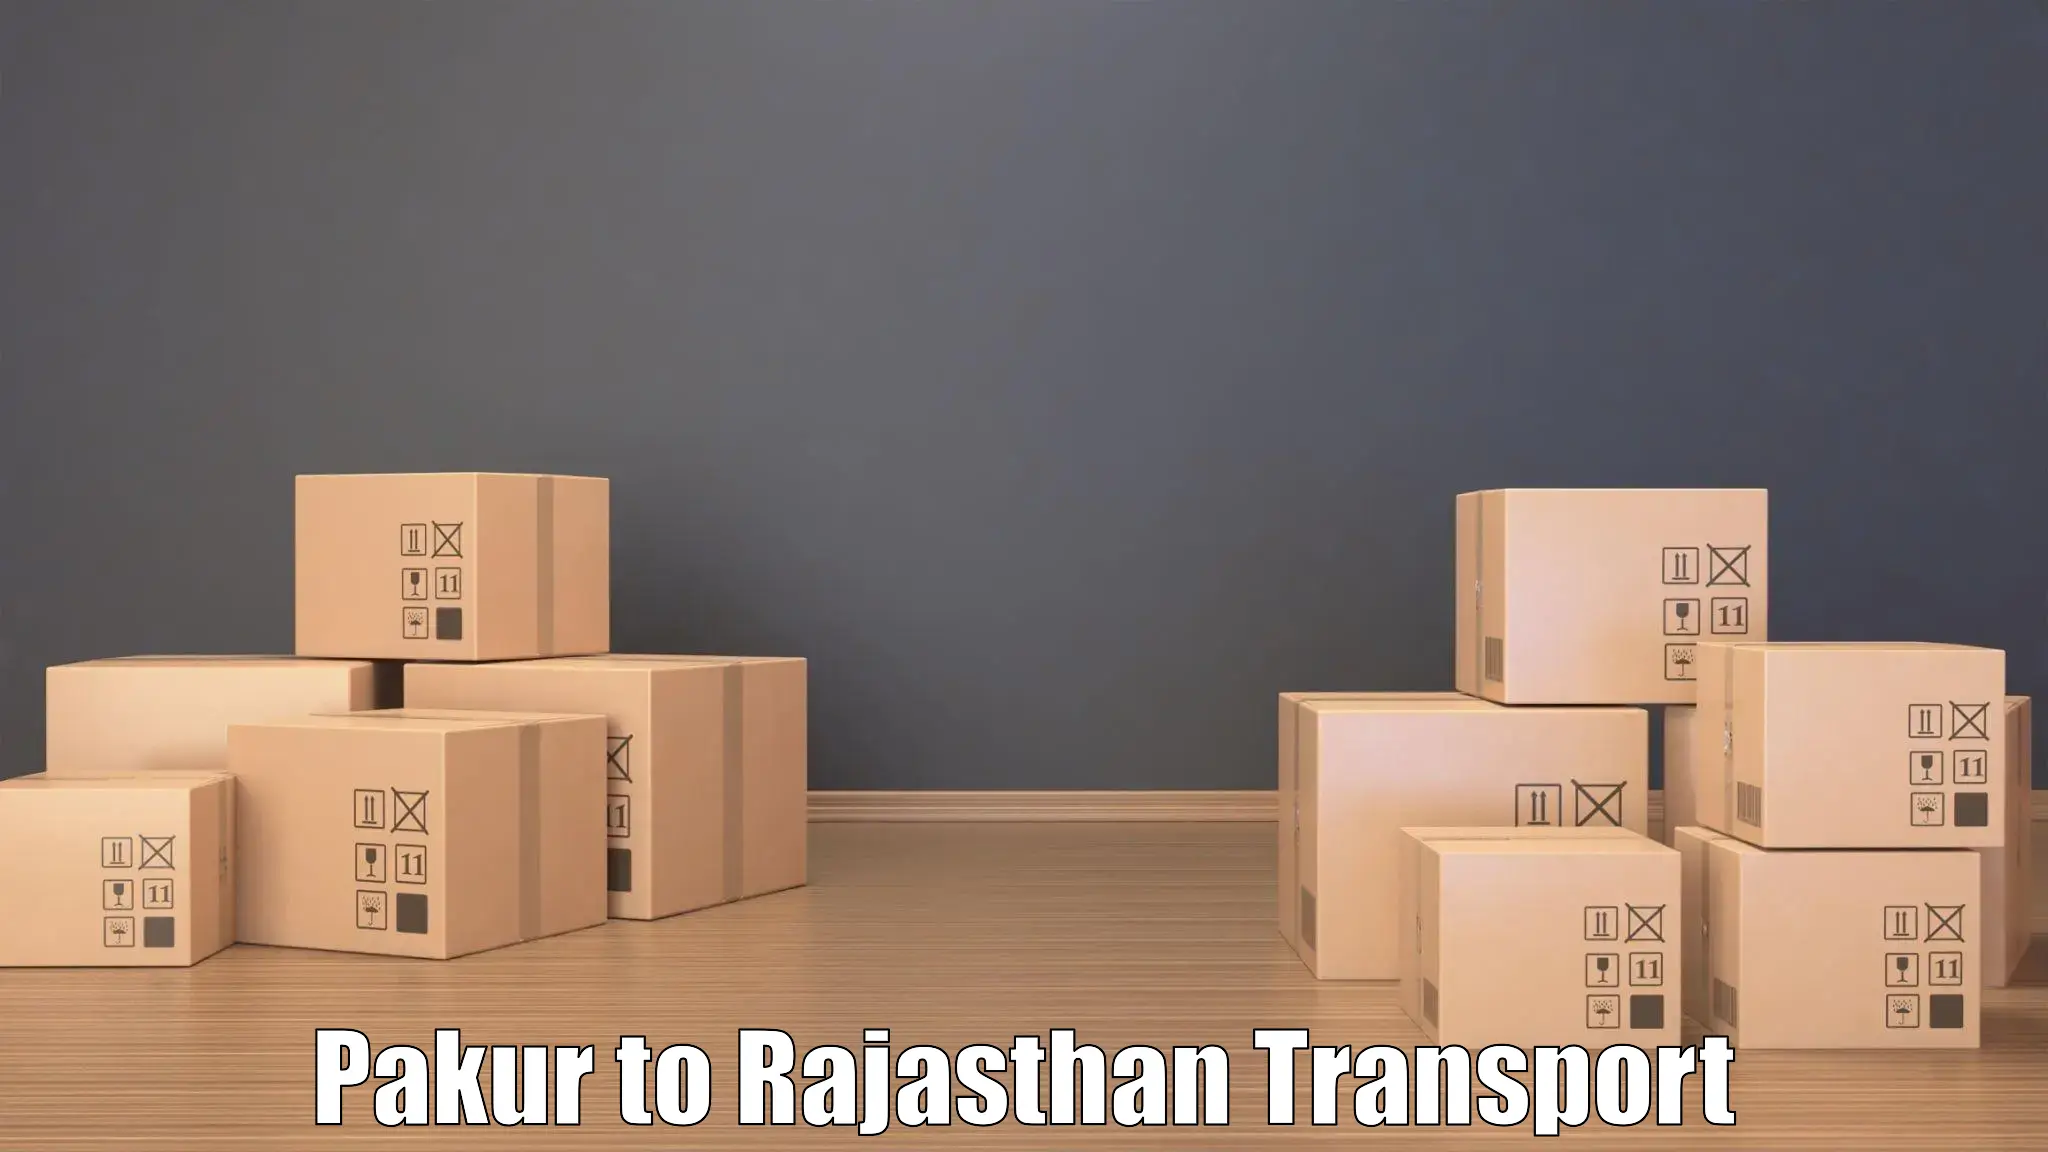 Land transport services in Pakur to Parbatsar